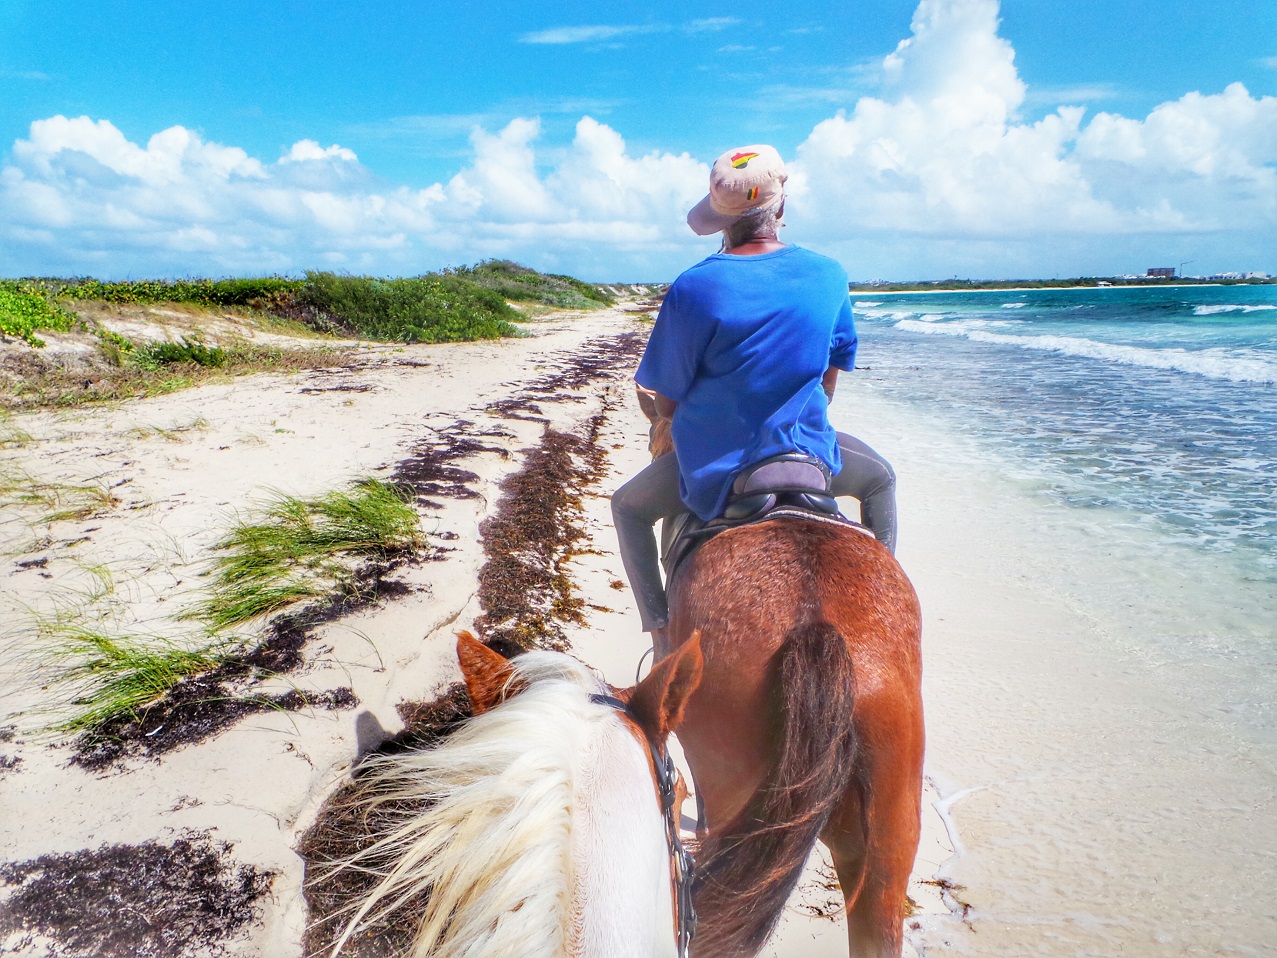 Be sure to take advantage of the horseback riding on the beach. Very relaxing!